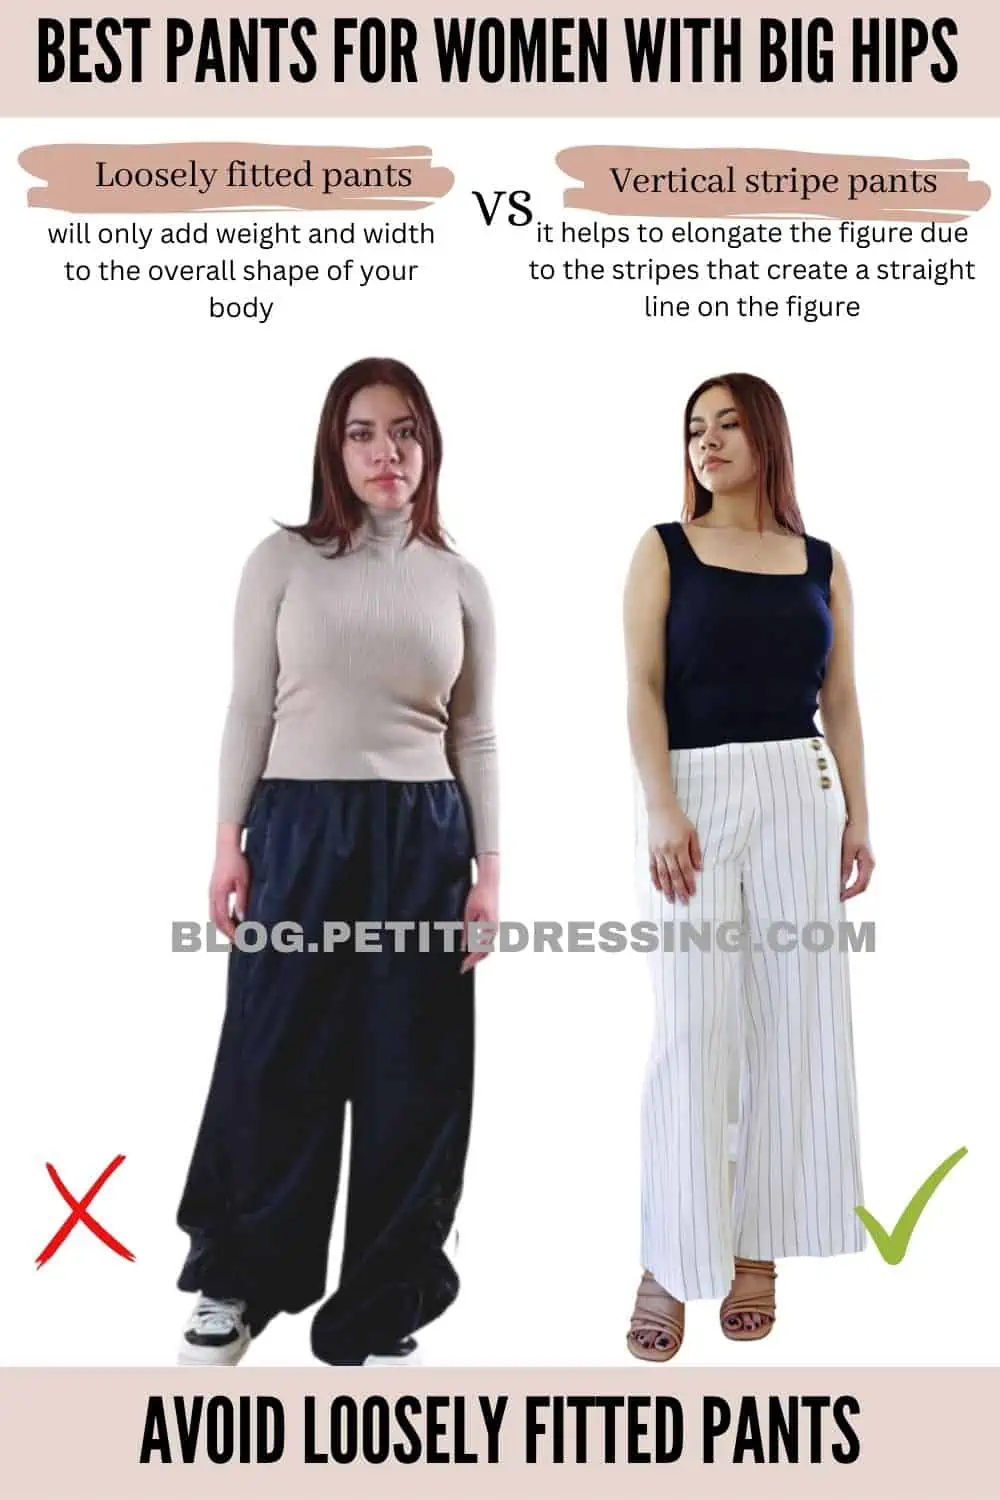 The Complete Pants Guide for Women With Big Hips - Petite Dressing